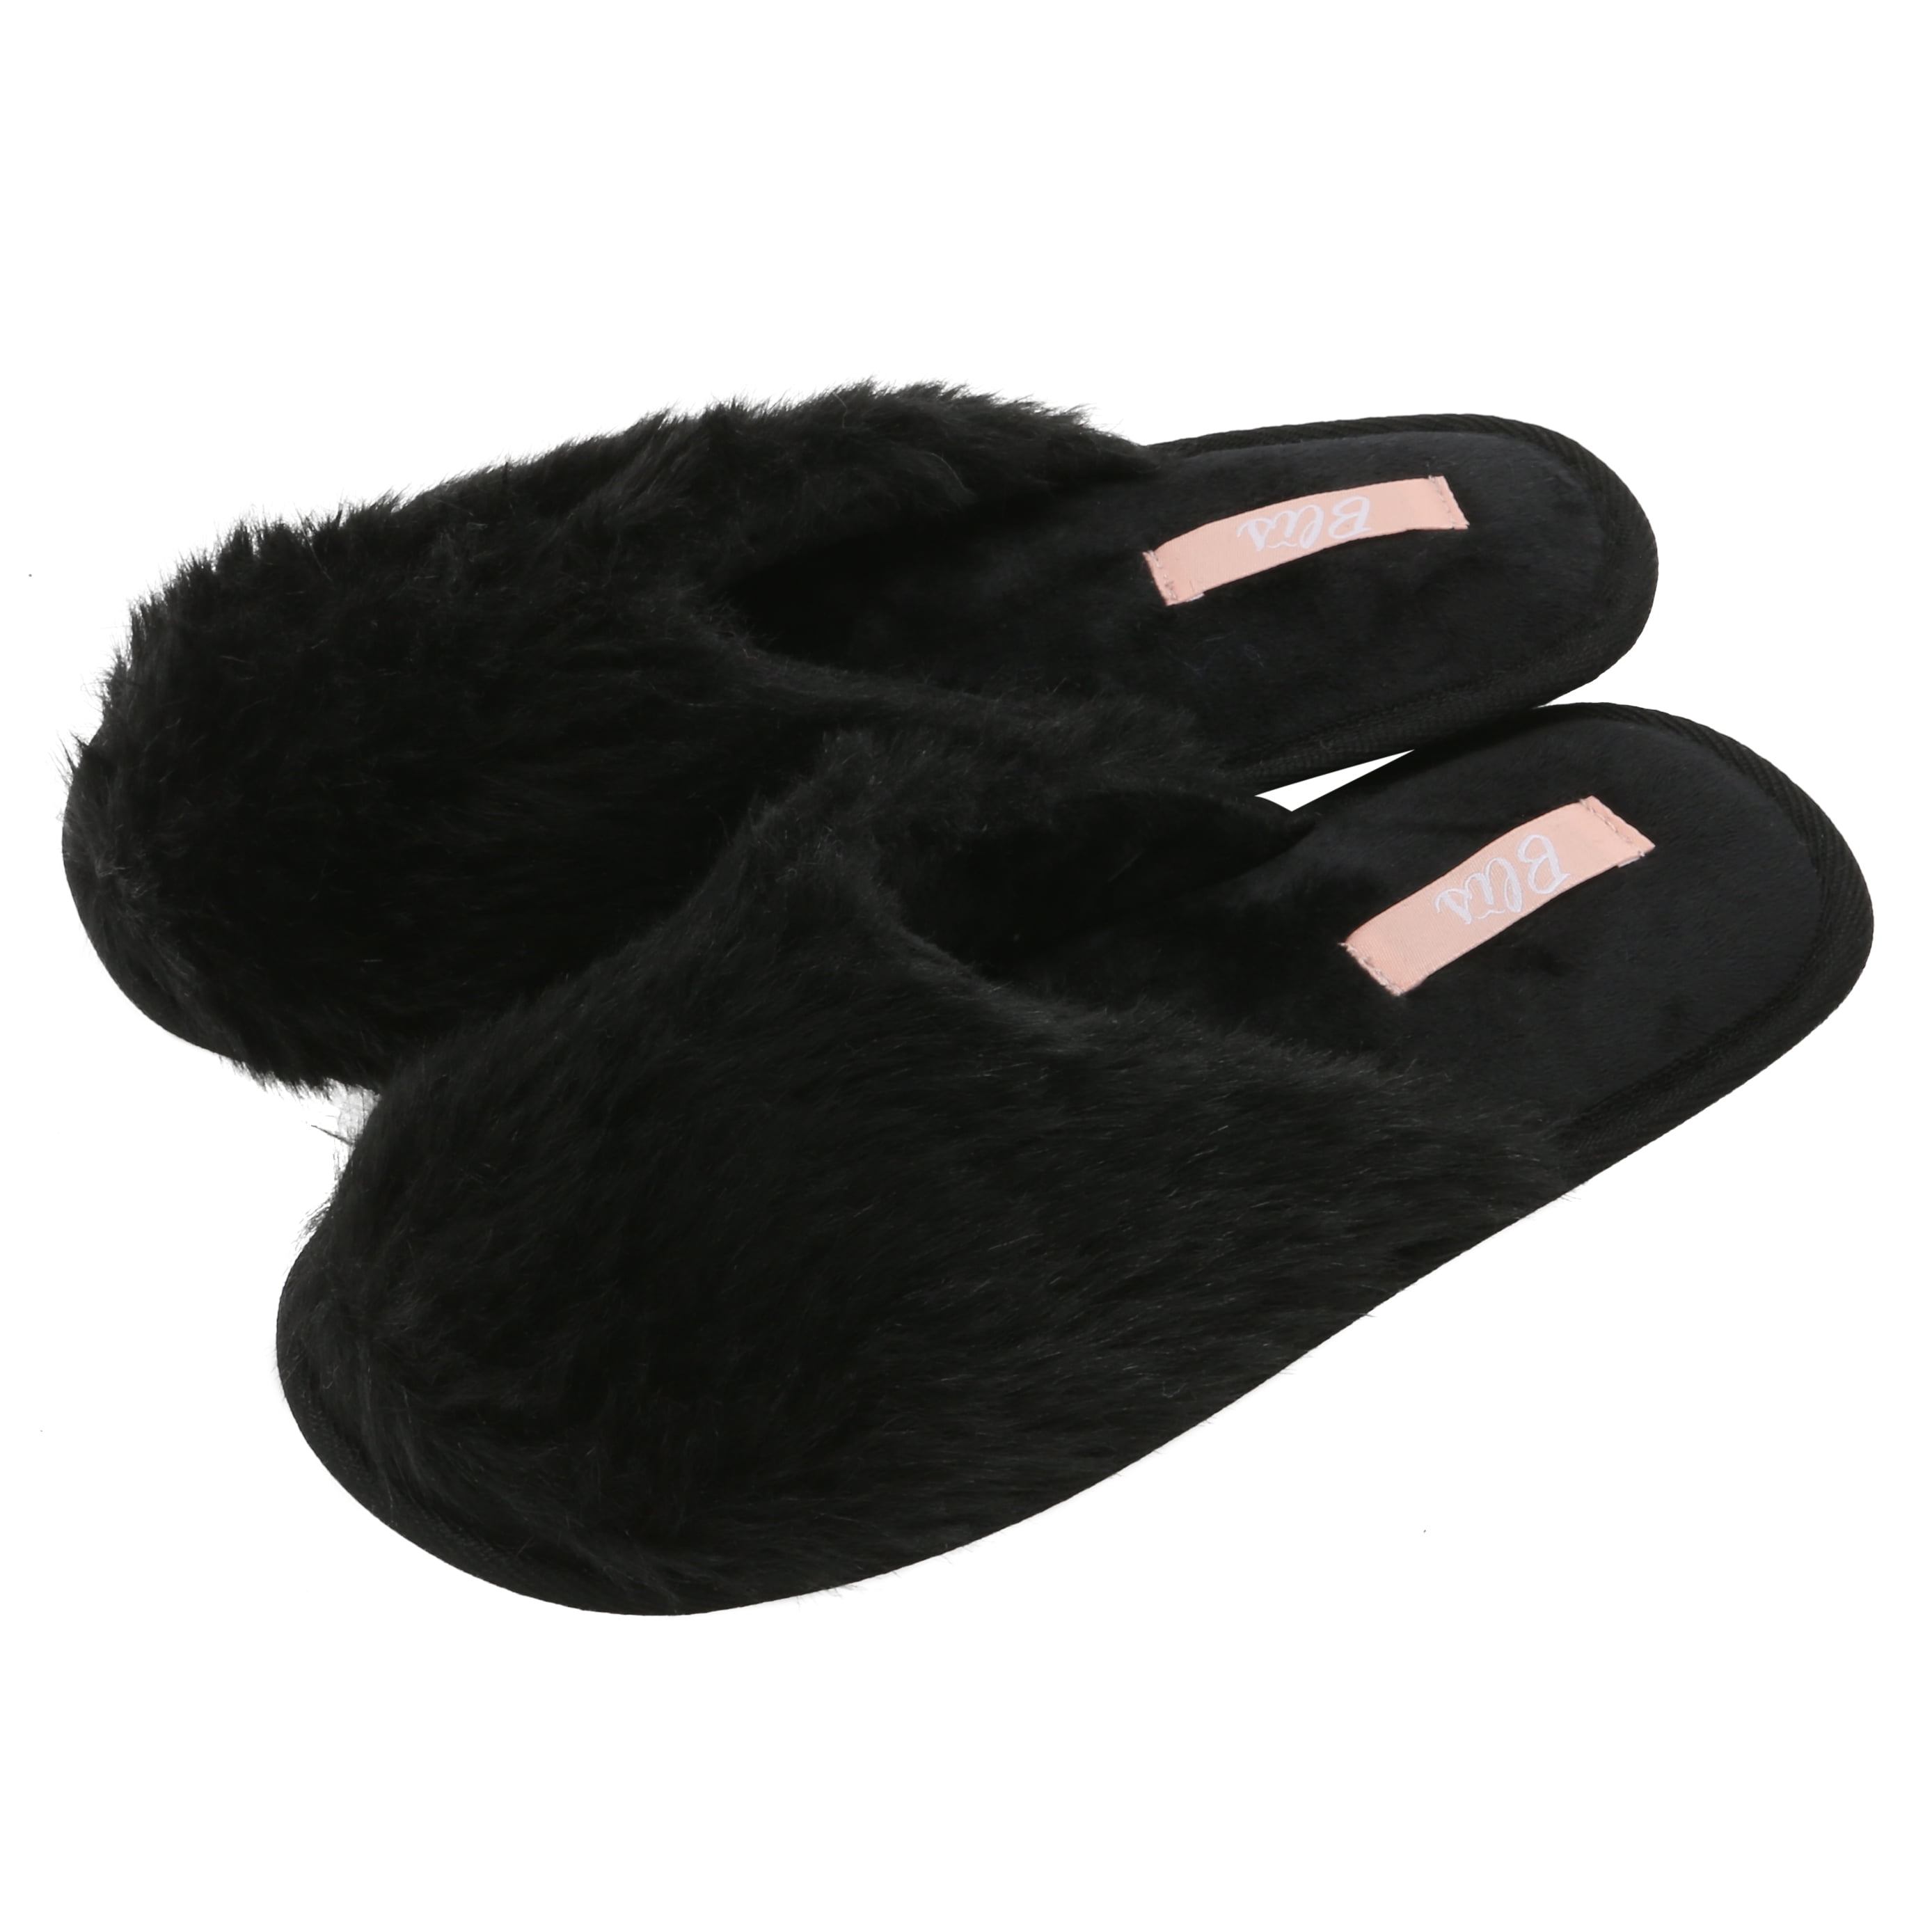 Blis Blis Womens Furry Knit House And Bedroom Slippers Soft And Cozy Slip Ons Black M 